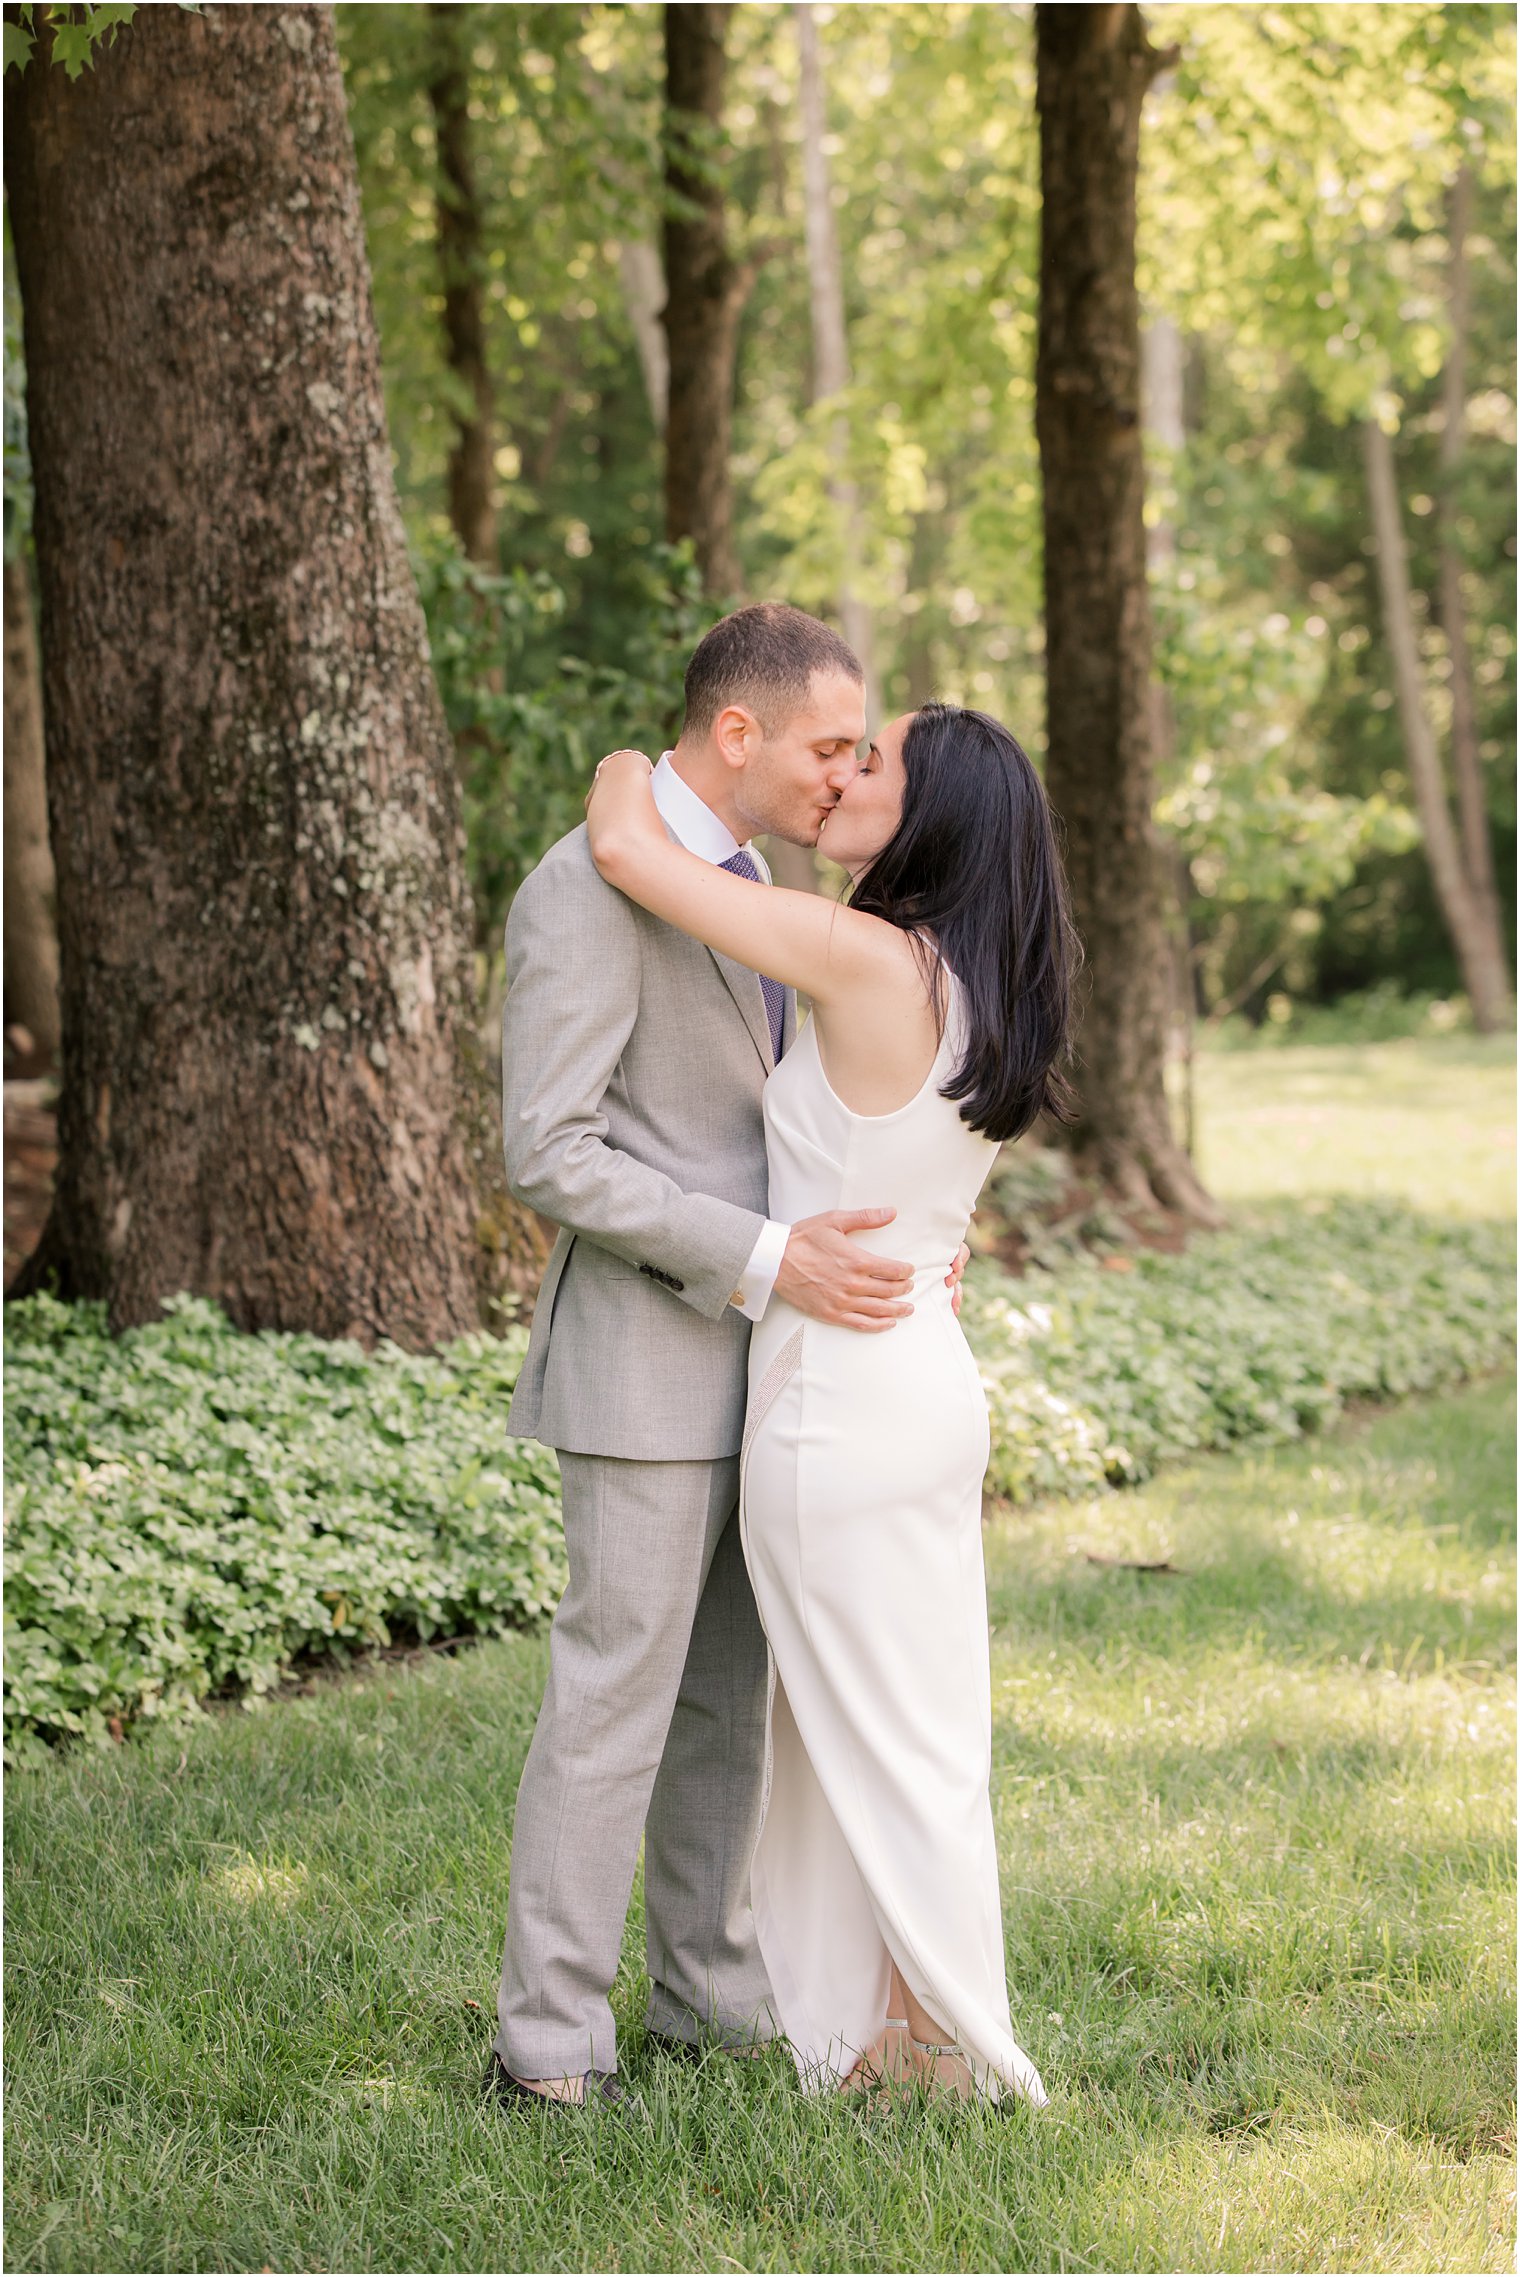 Bride and groom first look photos in New Hope PA micro wedding